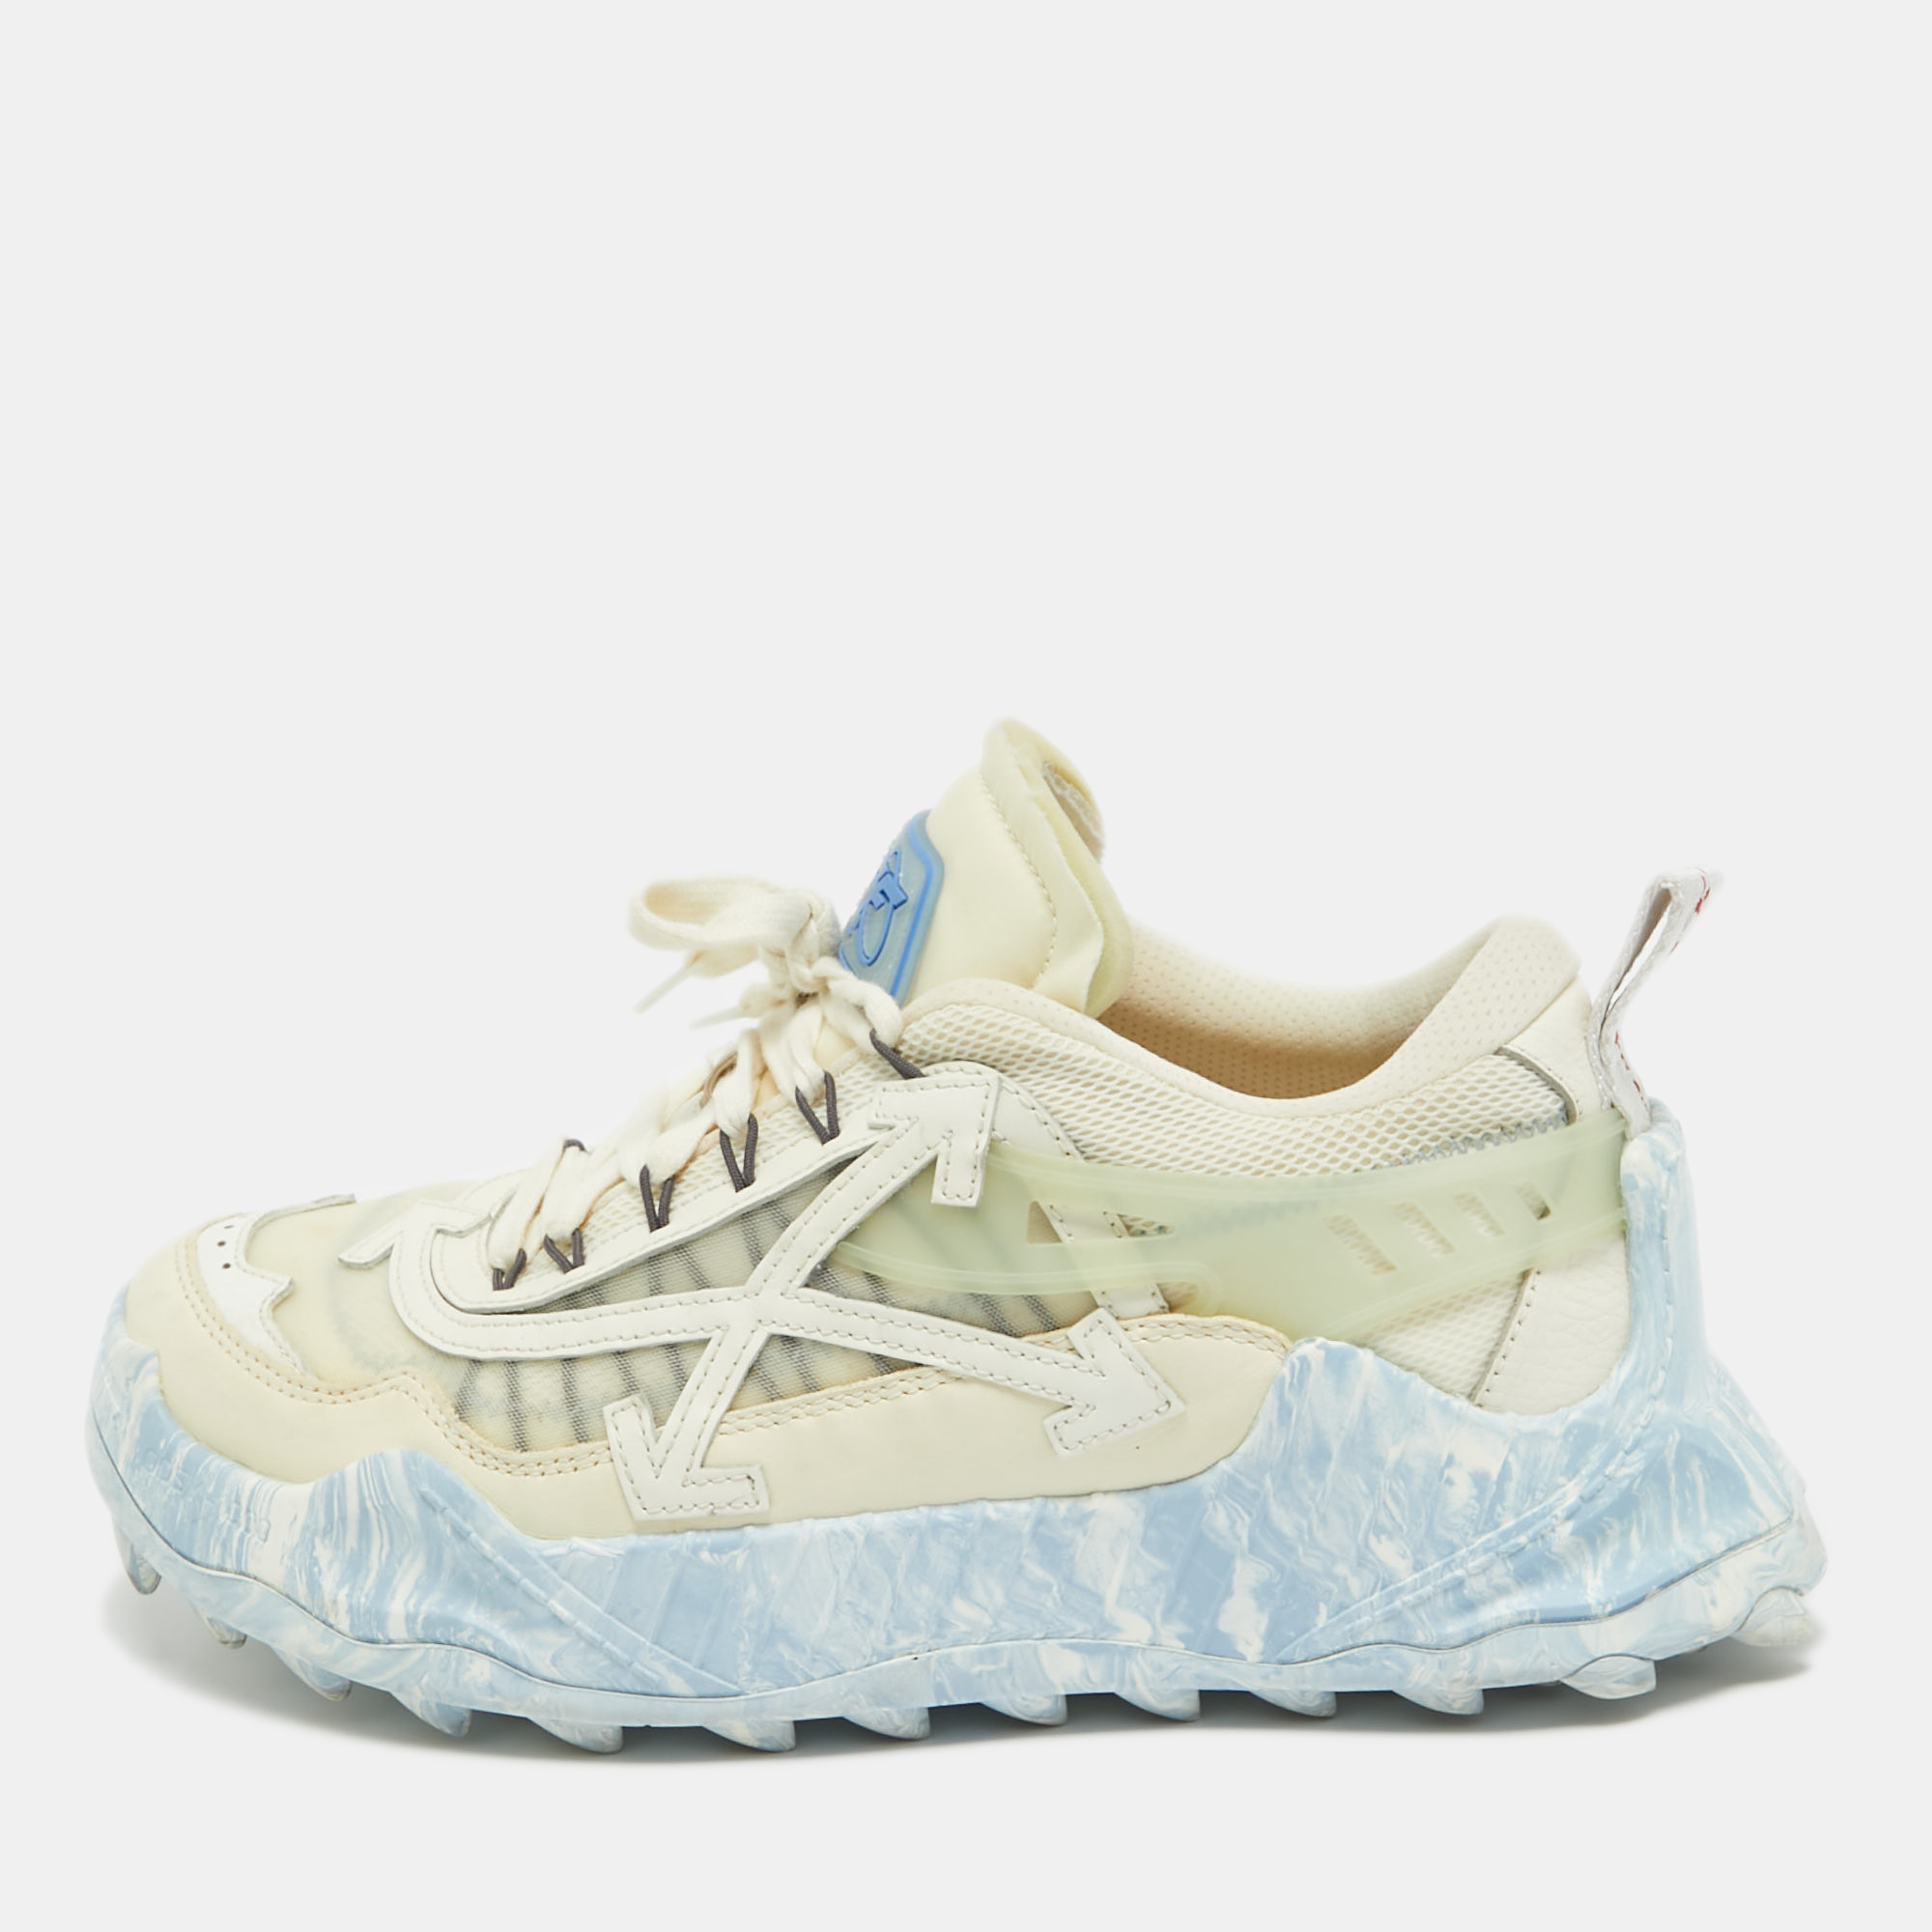 Off-white leather and mesh odsy 1000 sneakers size 43